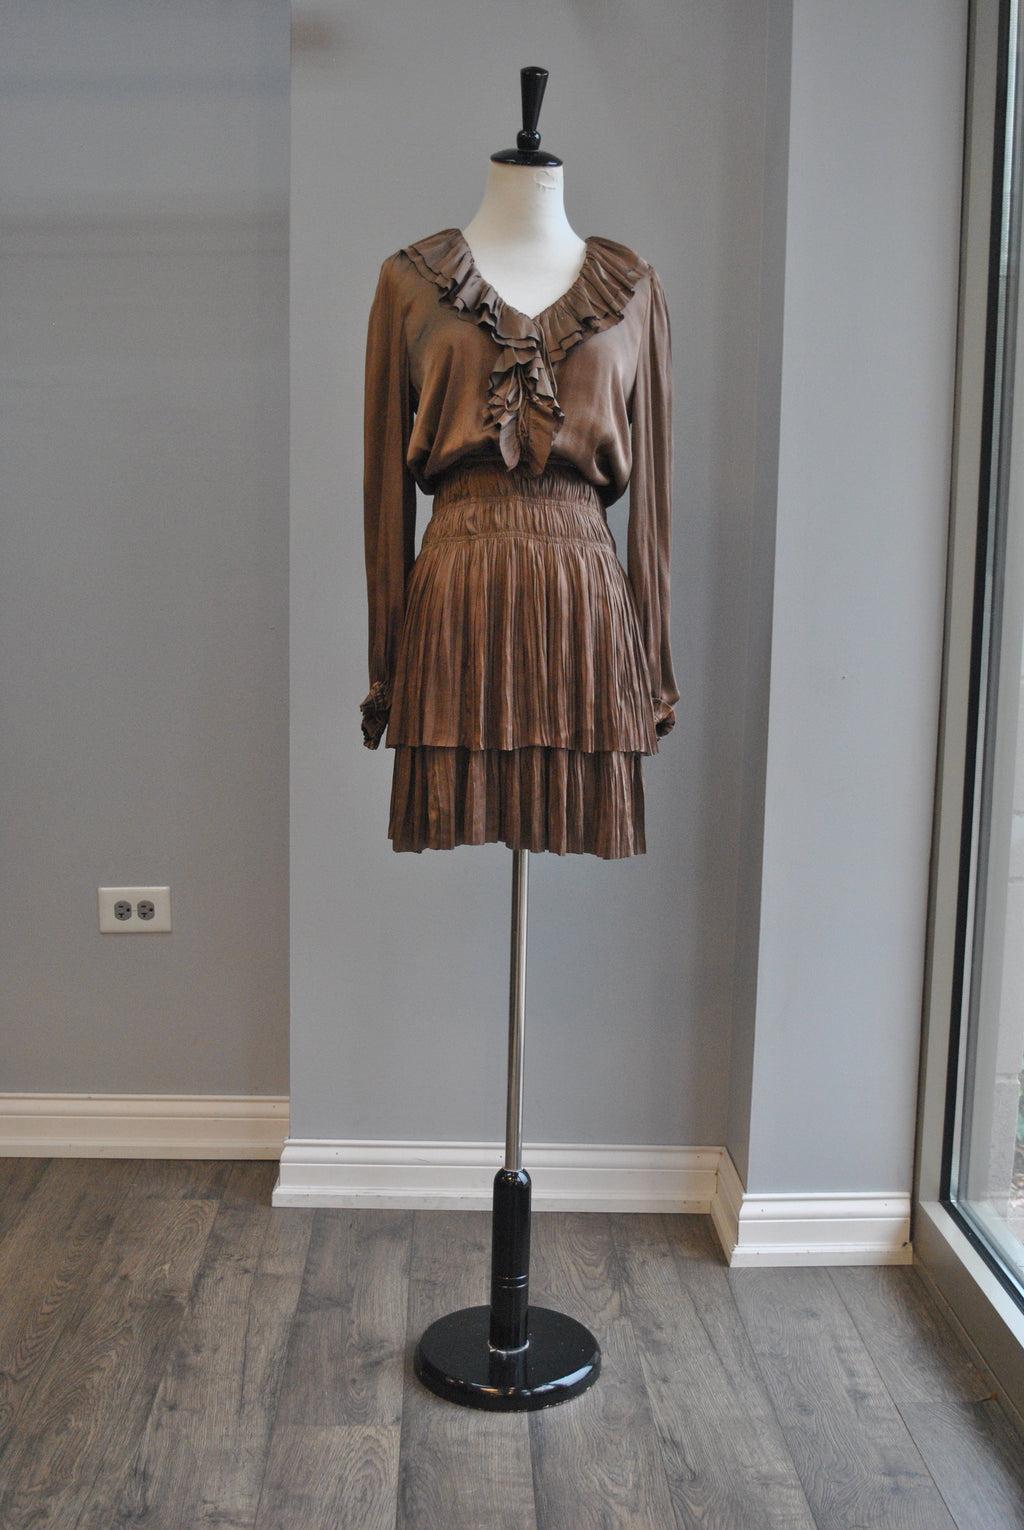 TOBACCO BROWN SILKY FALL DRESS WITH ELASTIC WAIST